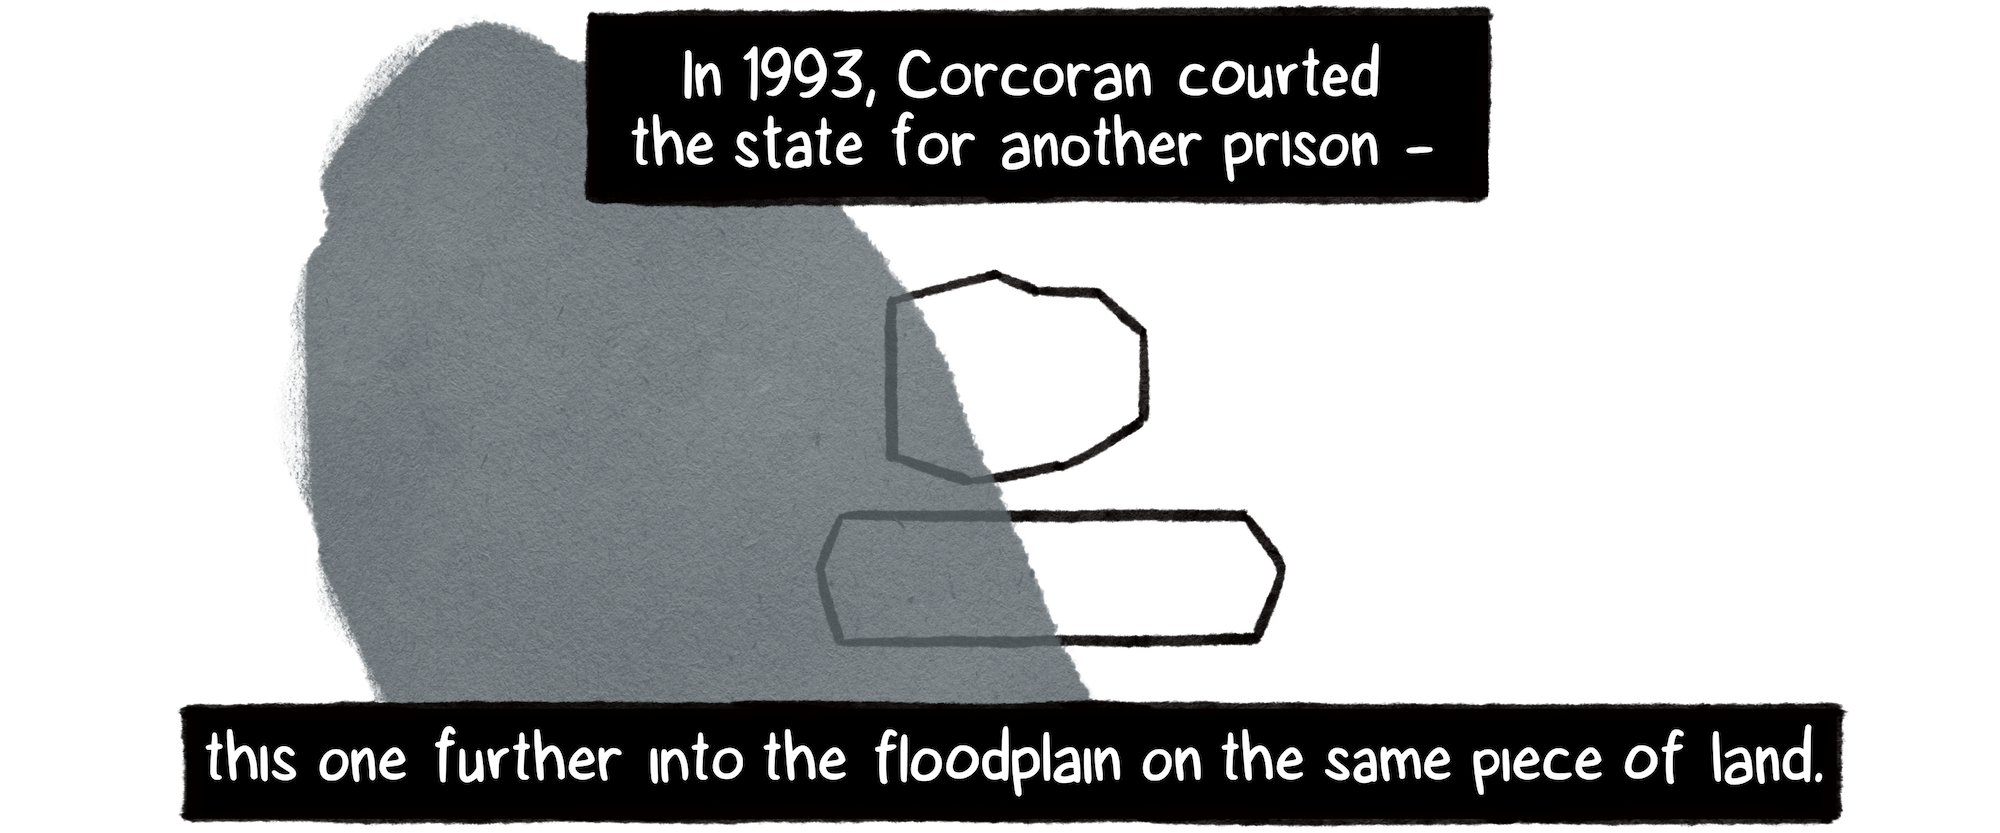 In 1993, Corcoran courted the state for another prison — this one further into the floodplain on the same piece of land. The image shows the building outlines partially in the floodplain.